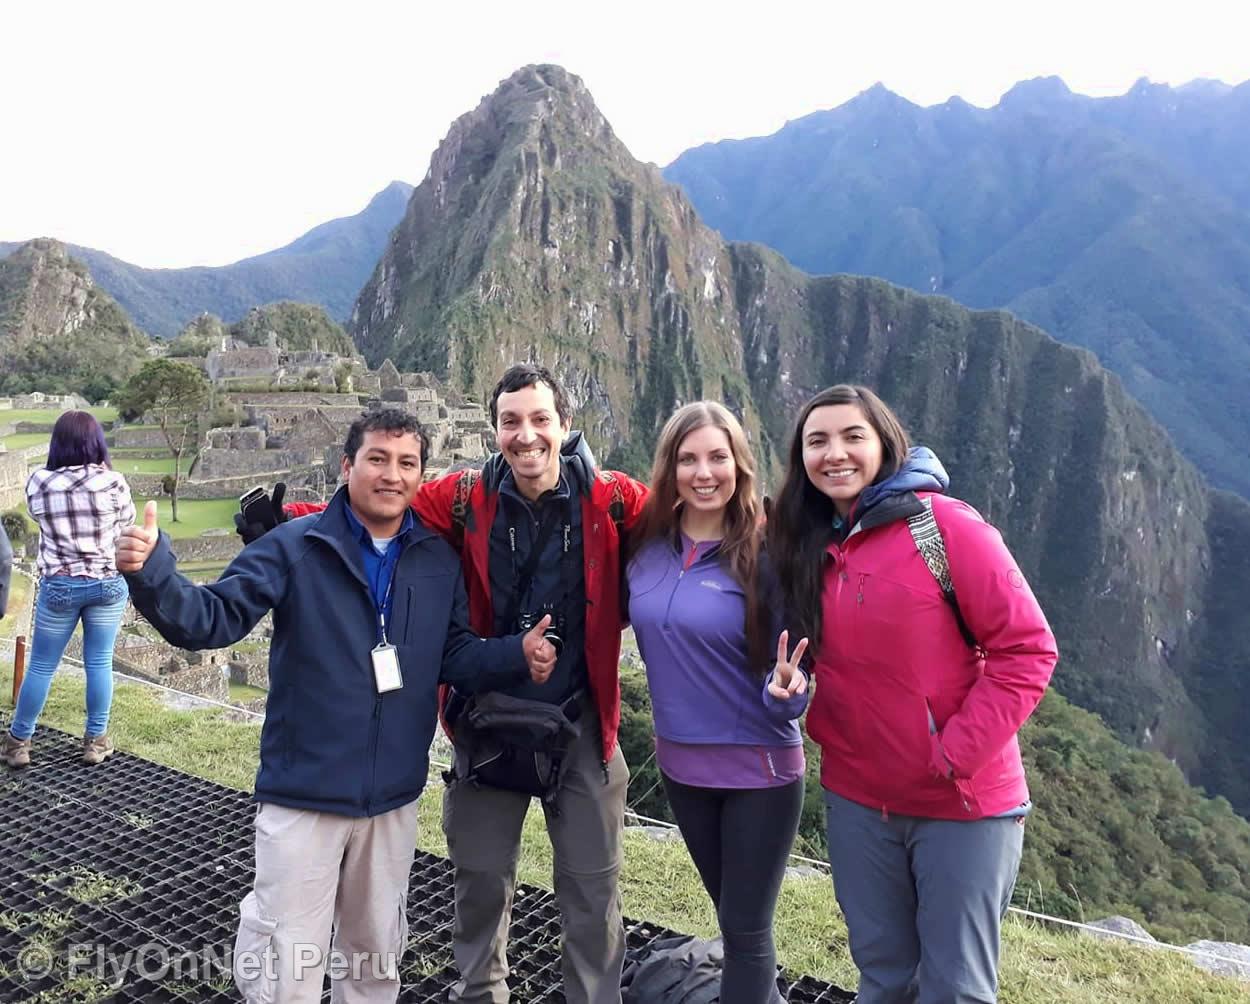 Photo Album: Part of the group in Machu Picchu